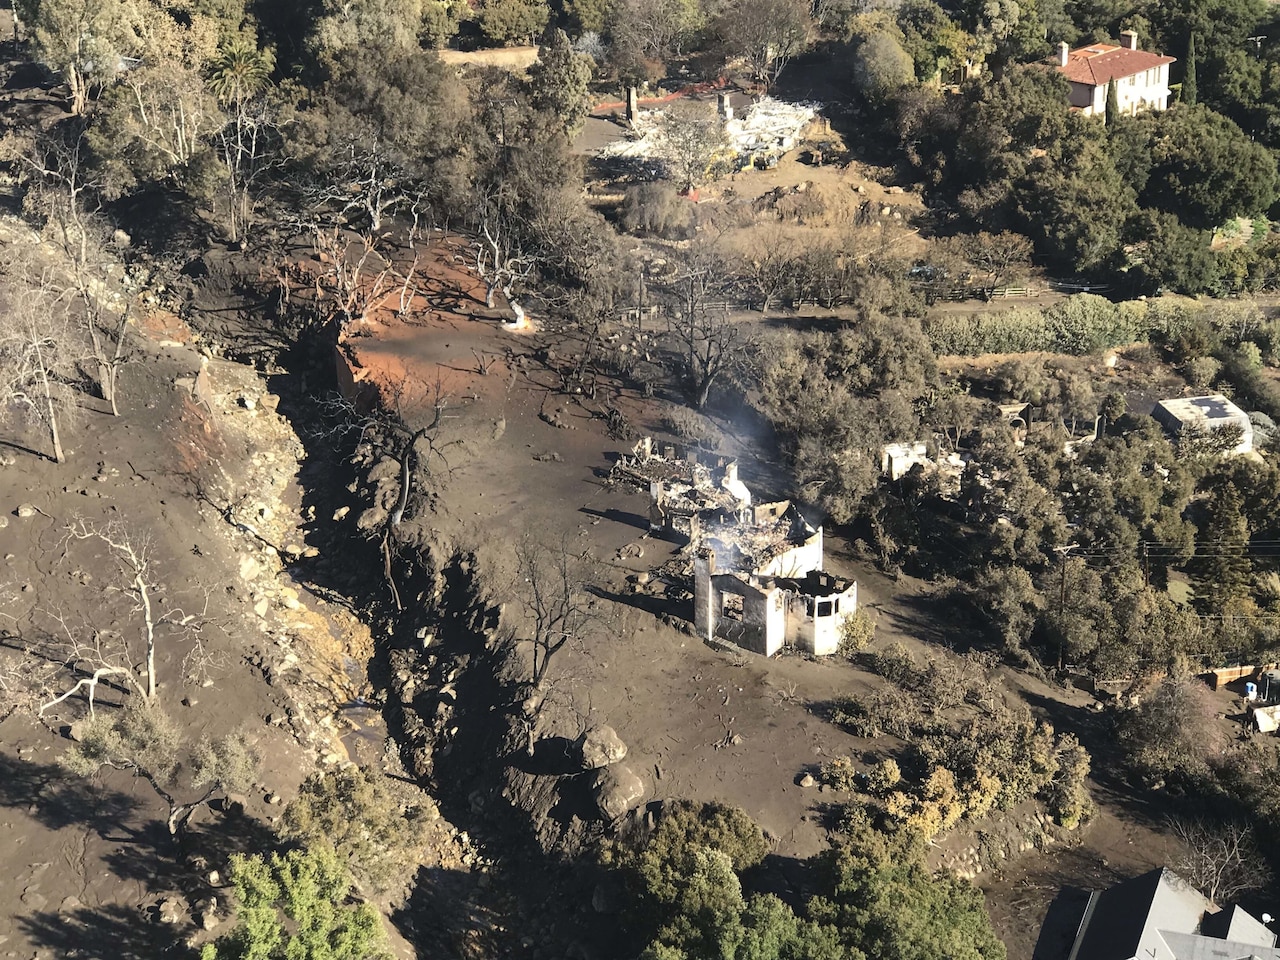 Aerial view of California mudslide area shot from an Air National Guard helicopter performing search and rescue operations.